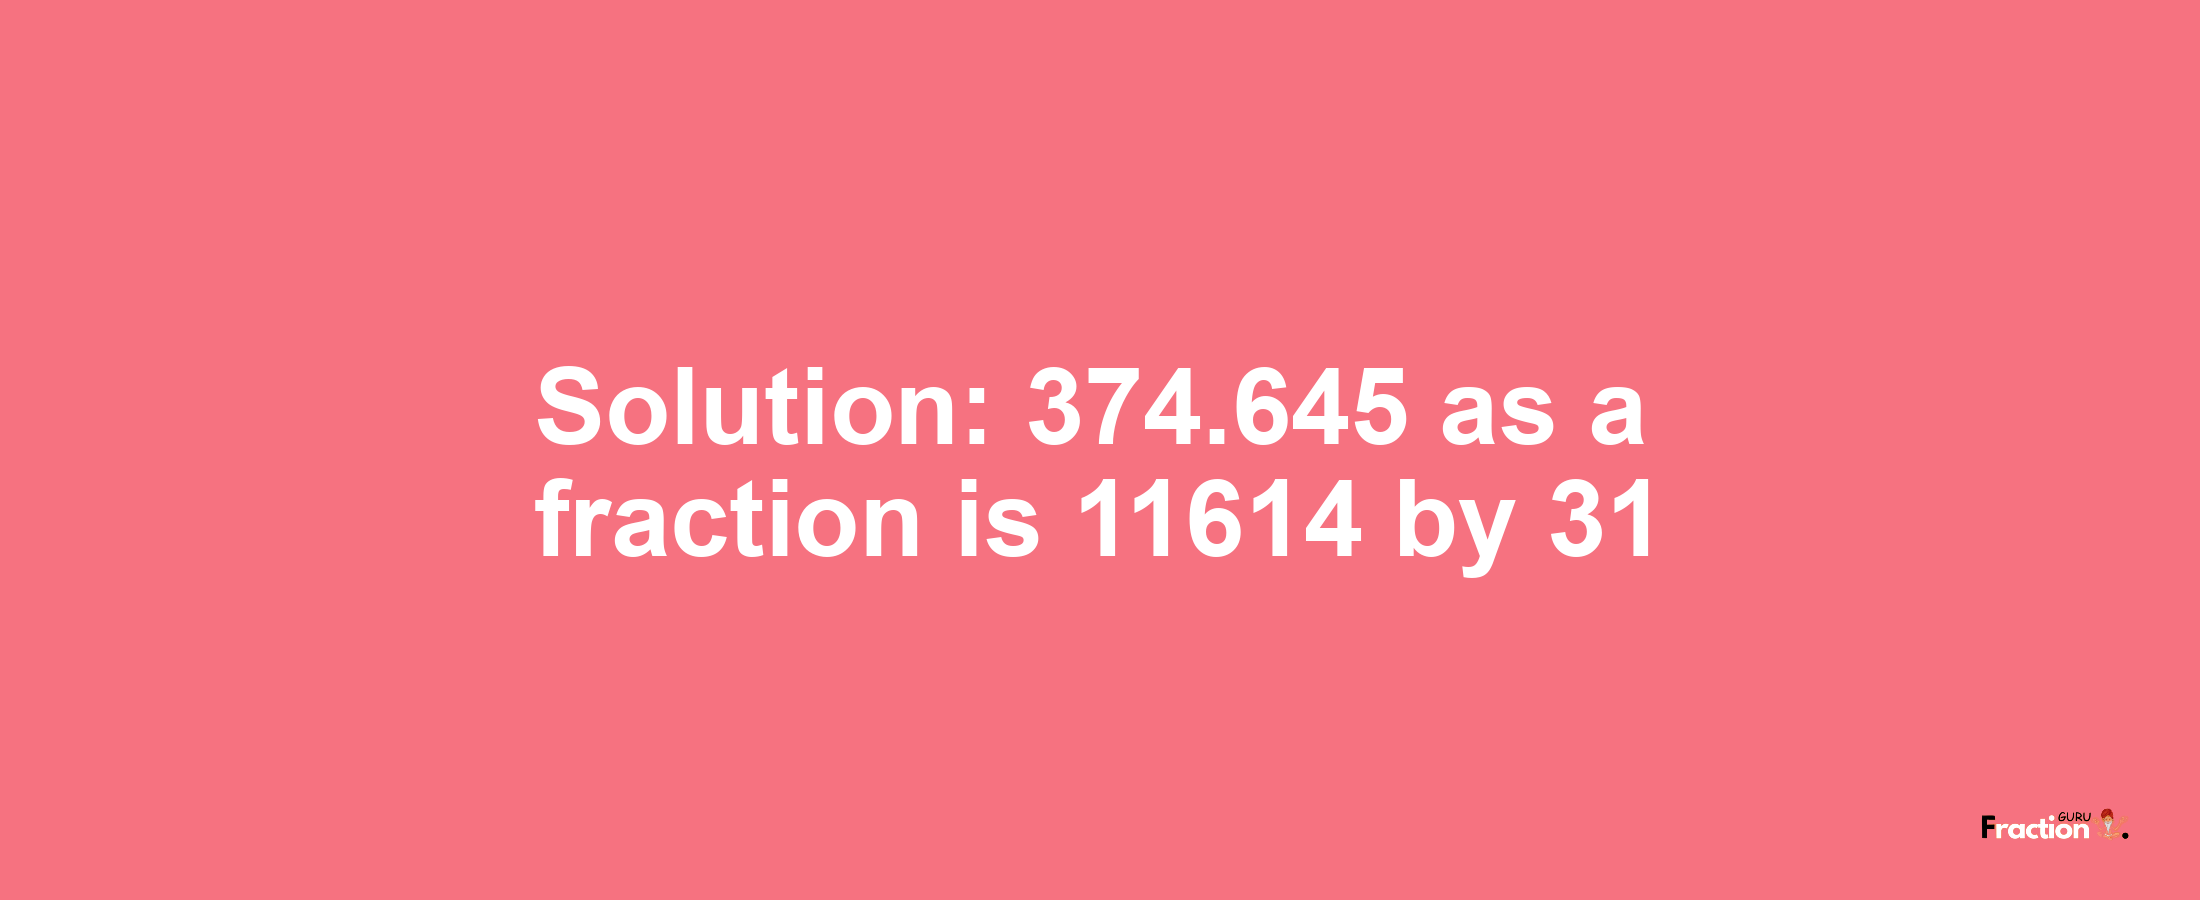 Solution:374.645 as a fraction is 11614/31